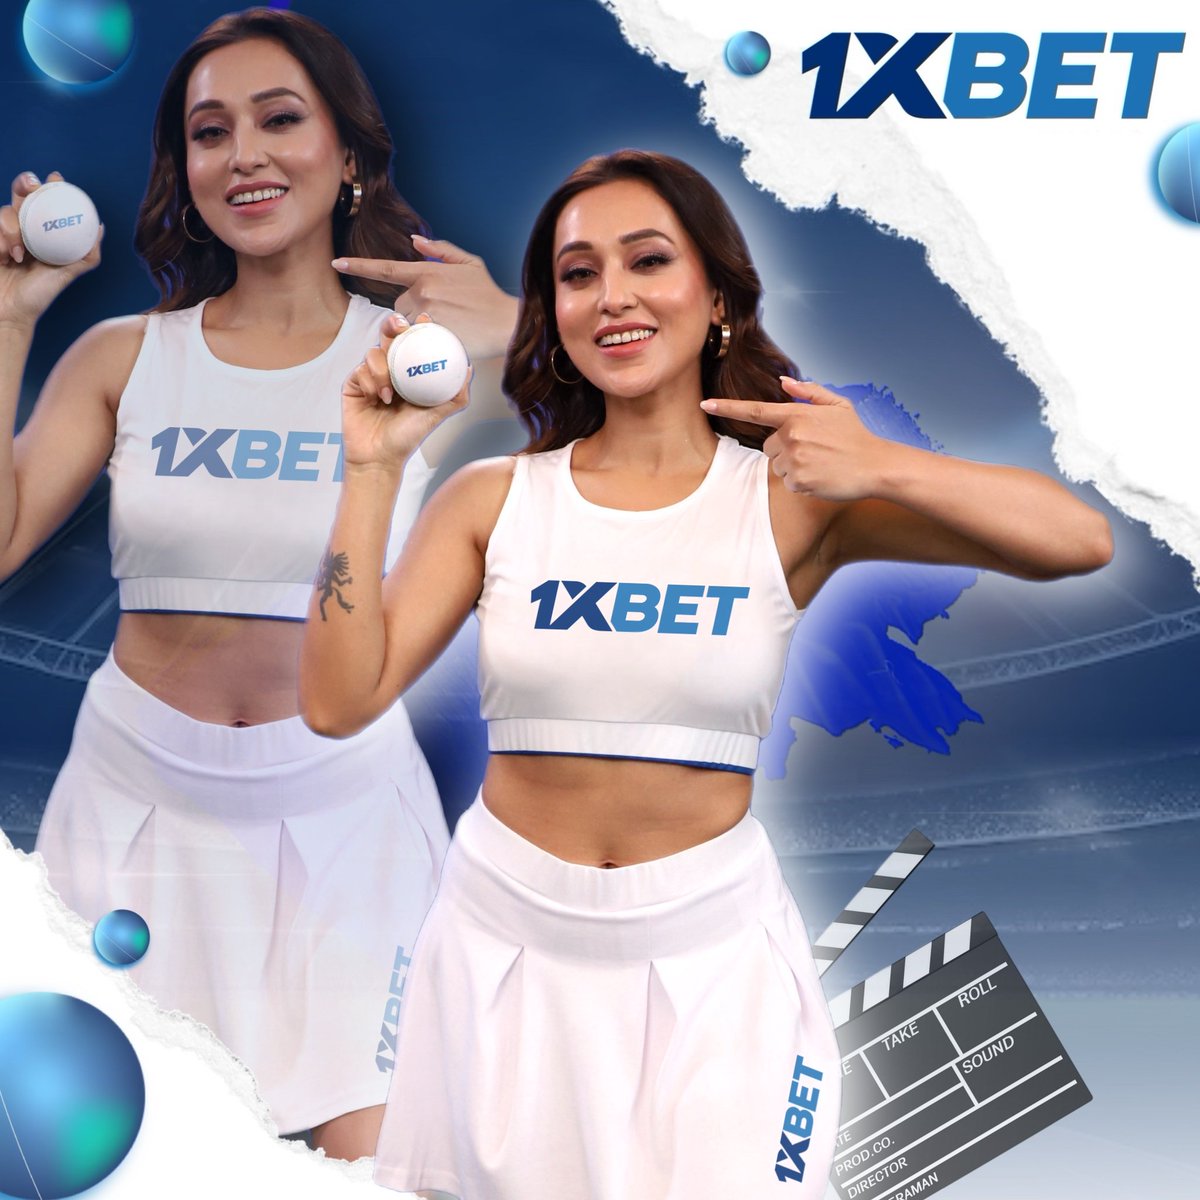 Are you as excited for the major cricket event final as I am? 🏏😀 Who do you think will take the trophy home? Follow 1xbet Bangladesh not to miss anything from the latest cricket news 😉 ❗️Use promo code IPL24BD to unlock an exclusive bonus 🎉 #1xbet